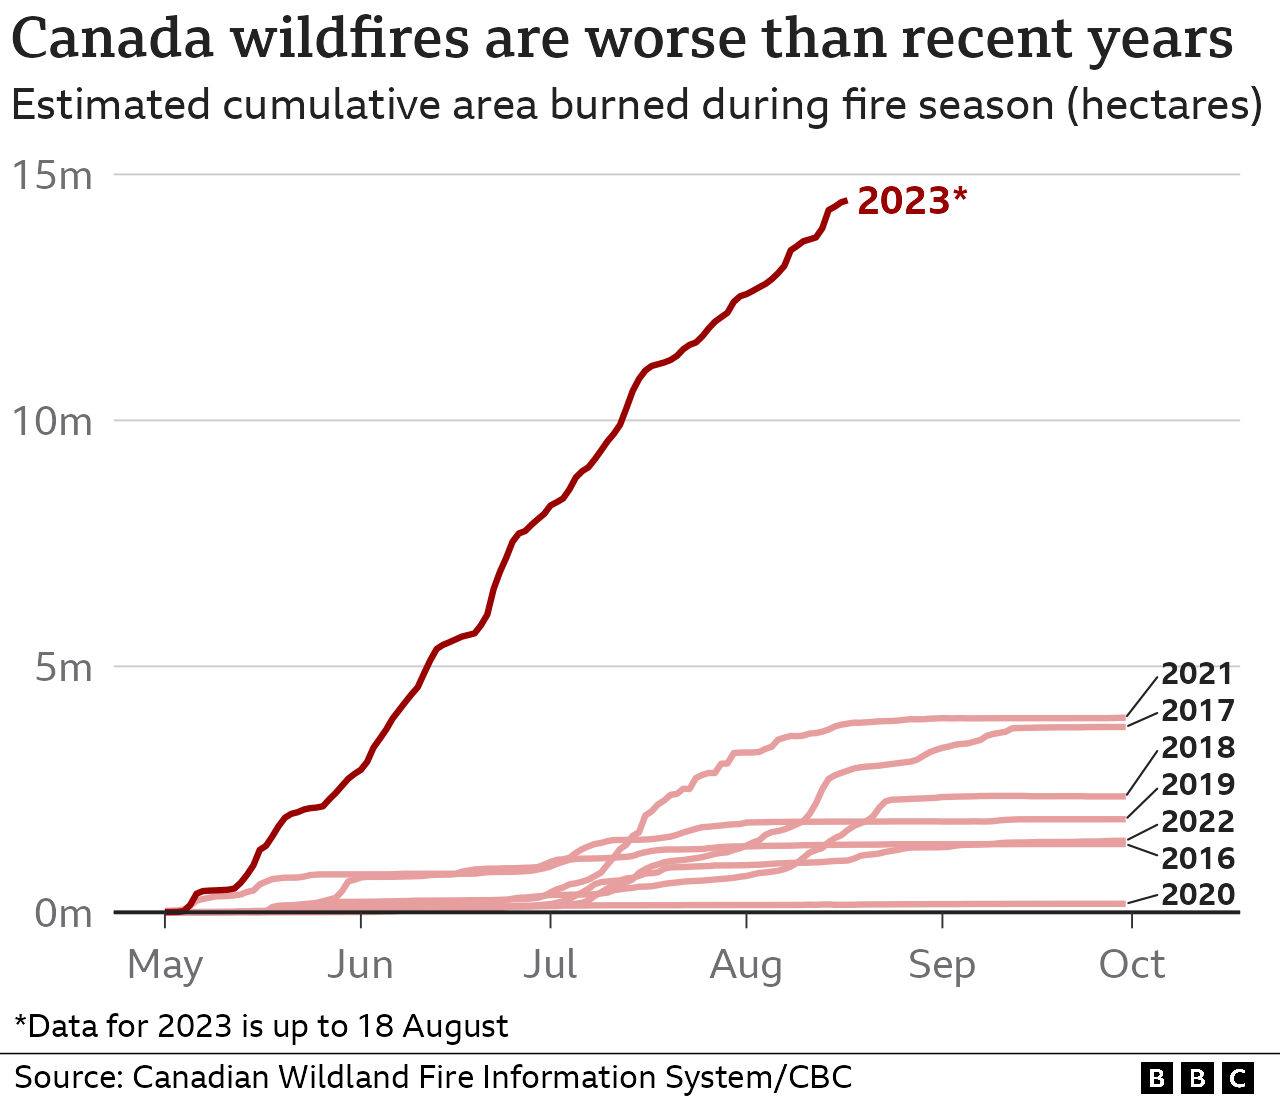 A BBC chart titled "Canada wildfires are worst than previous years" shows that close to 15m hectares have been burned in 2023 already, compared to the previous high of around 4.5m in 2021 and 2017. The numbers for 2018, 2019, 2022, 2016 and 2020 are far lower